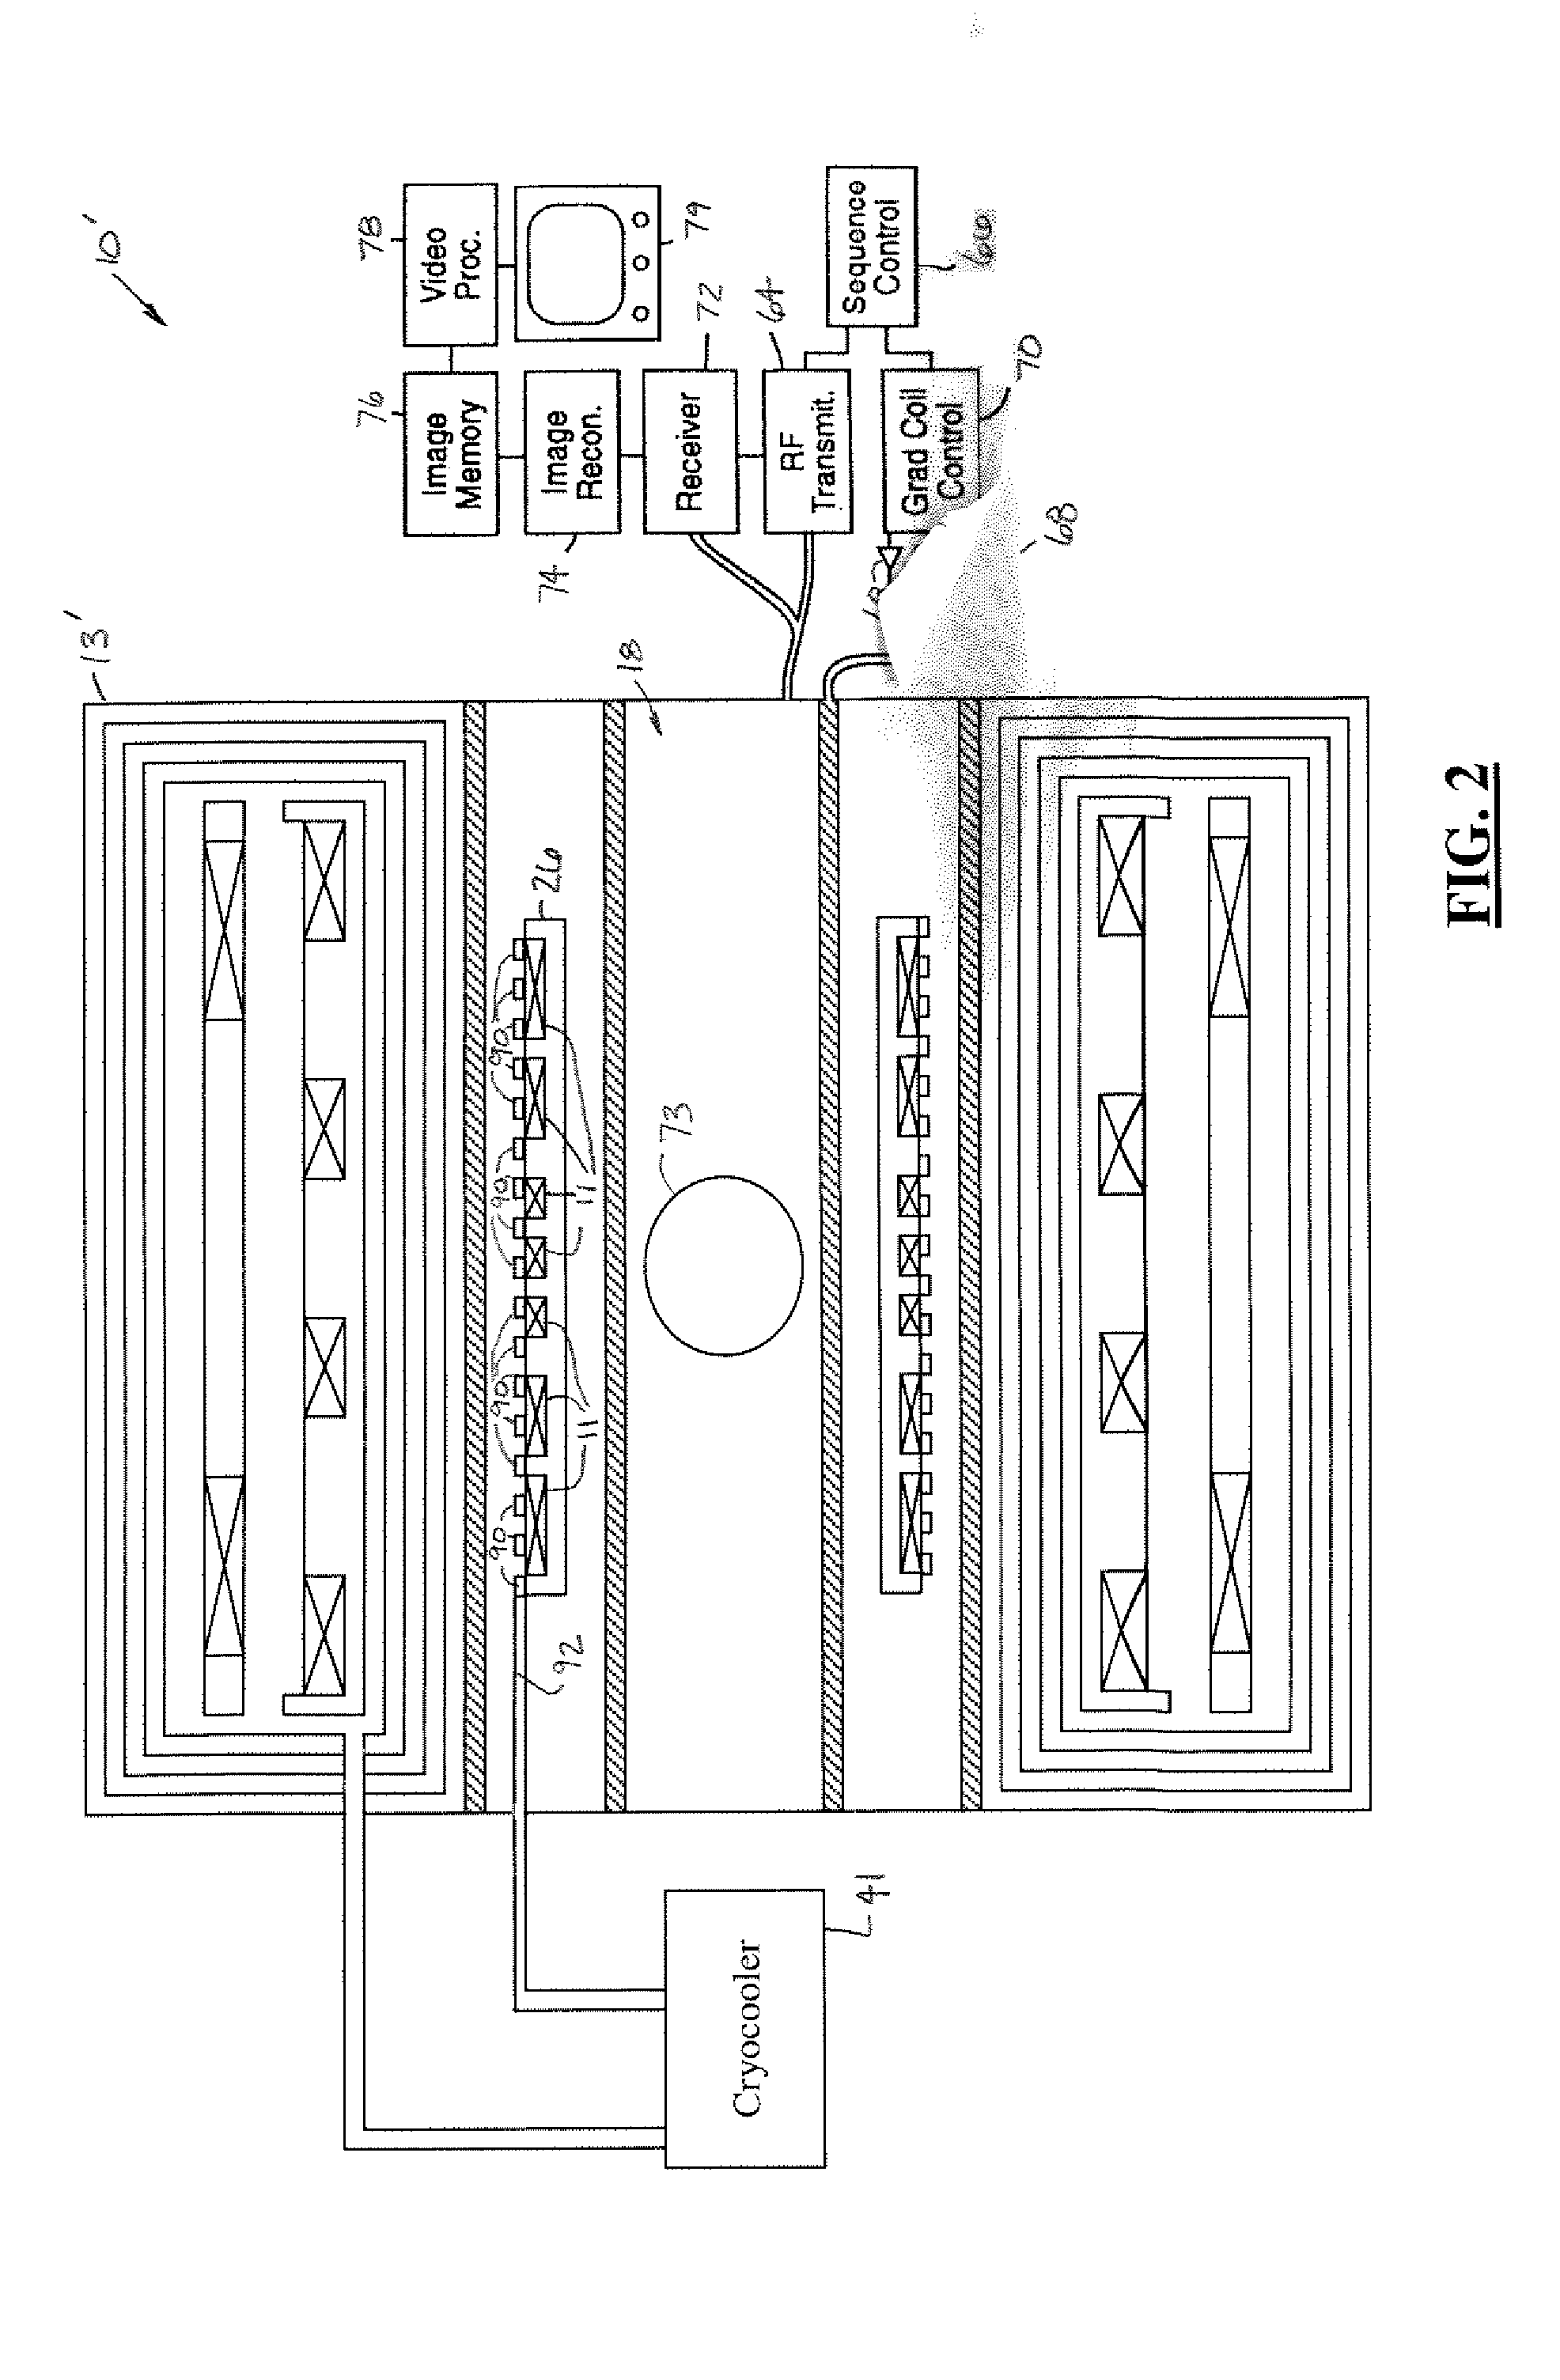 MRI System Utilizing Supplemental Static Field-Shaping Coils